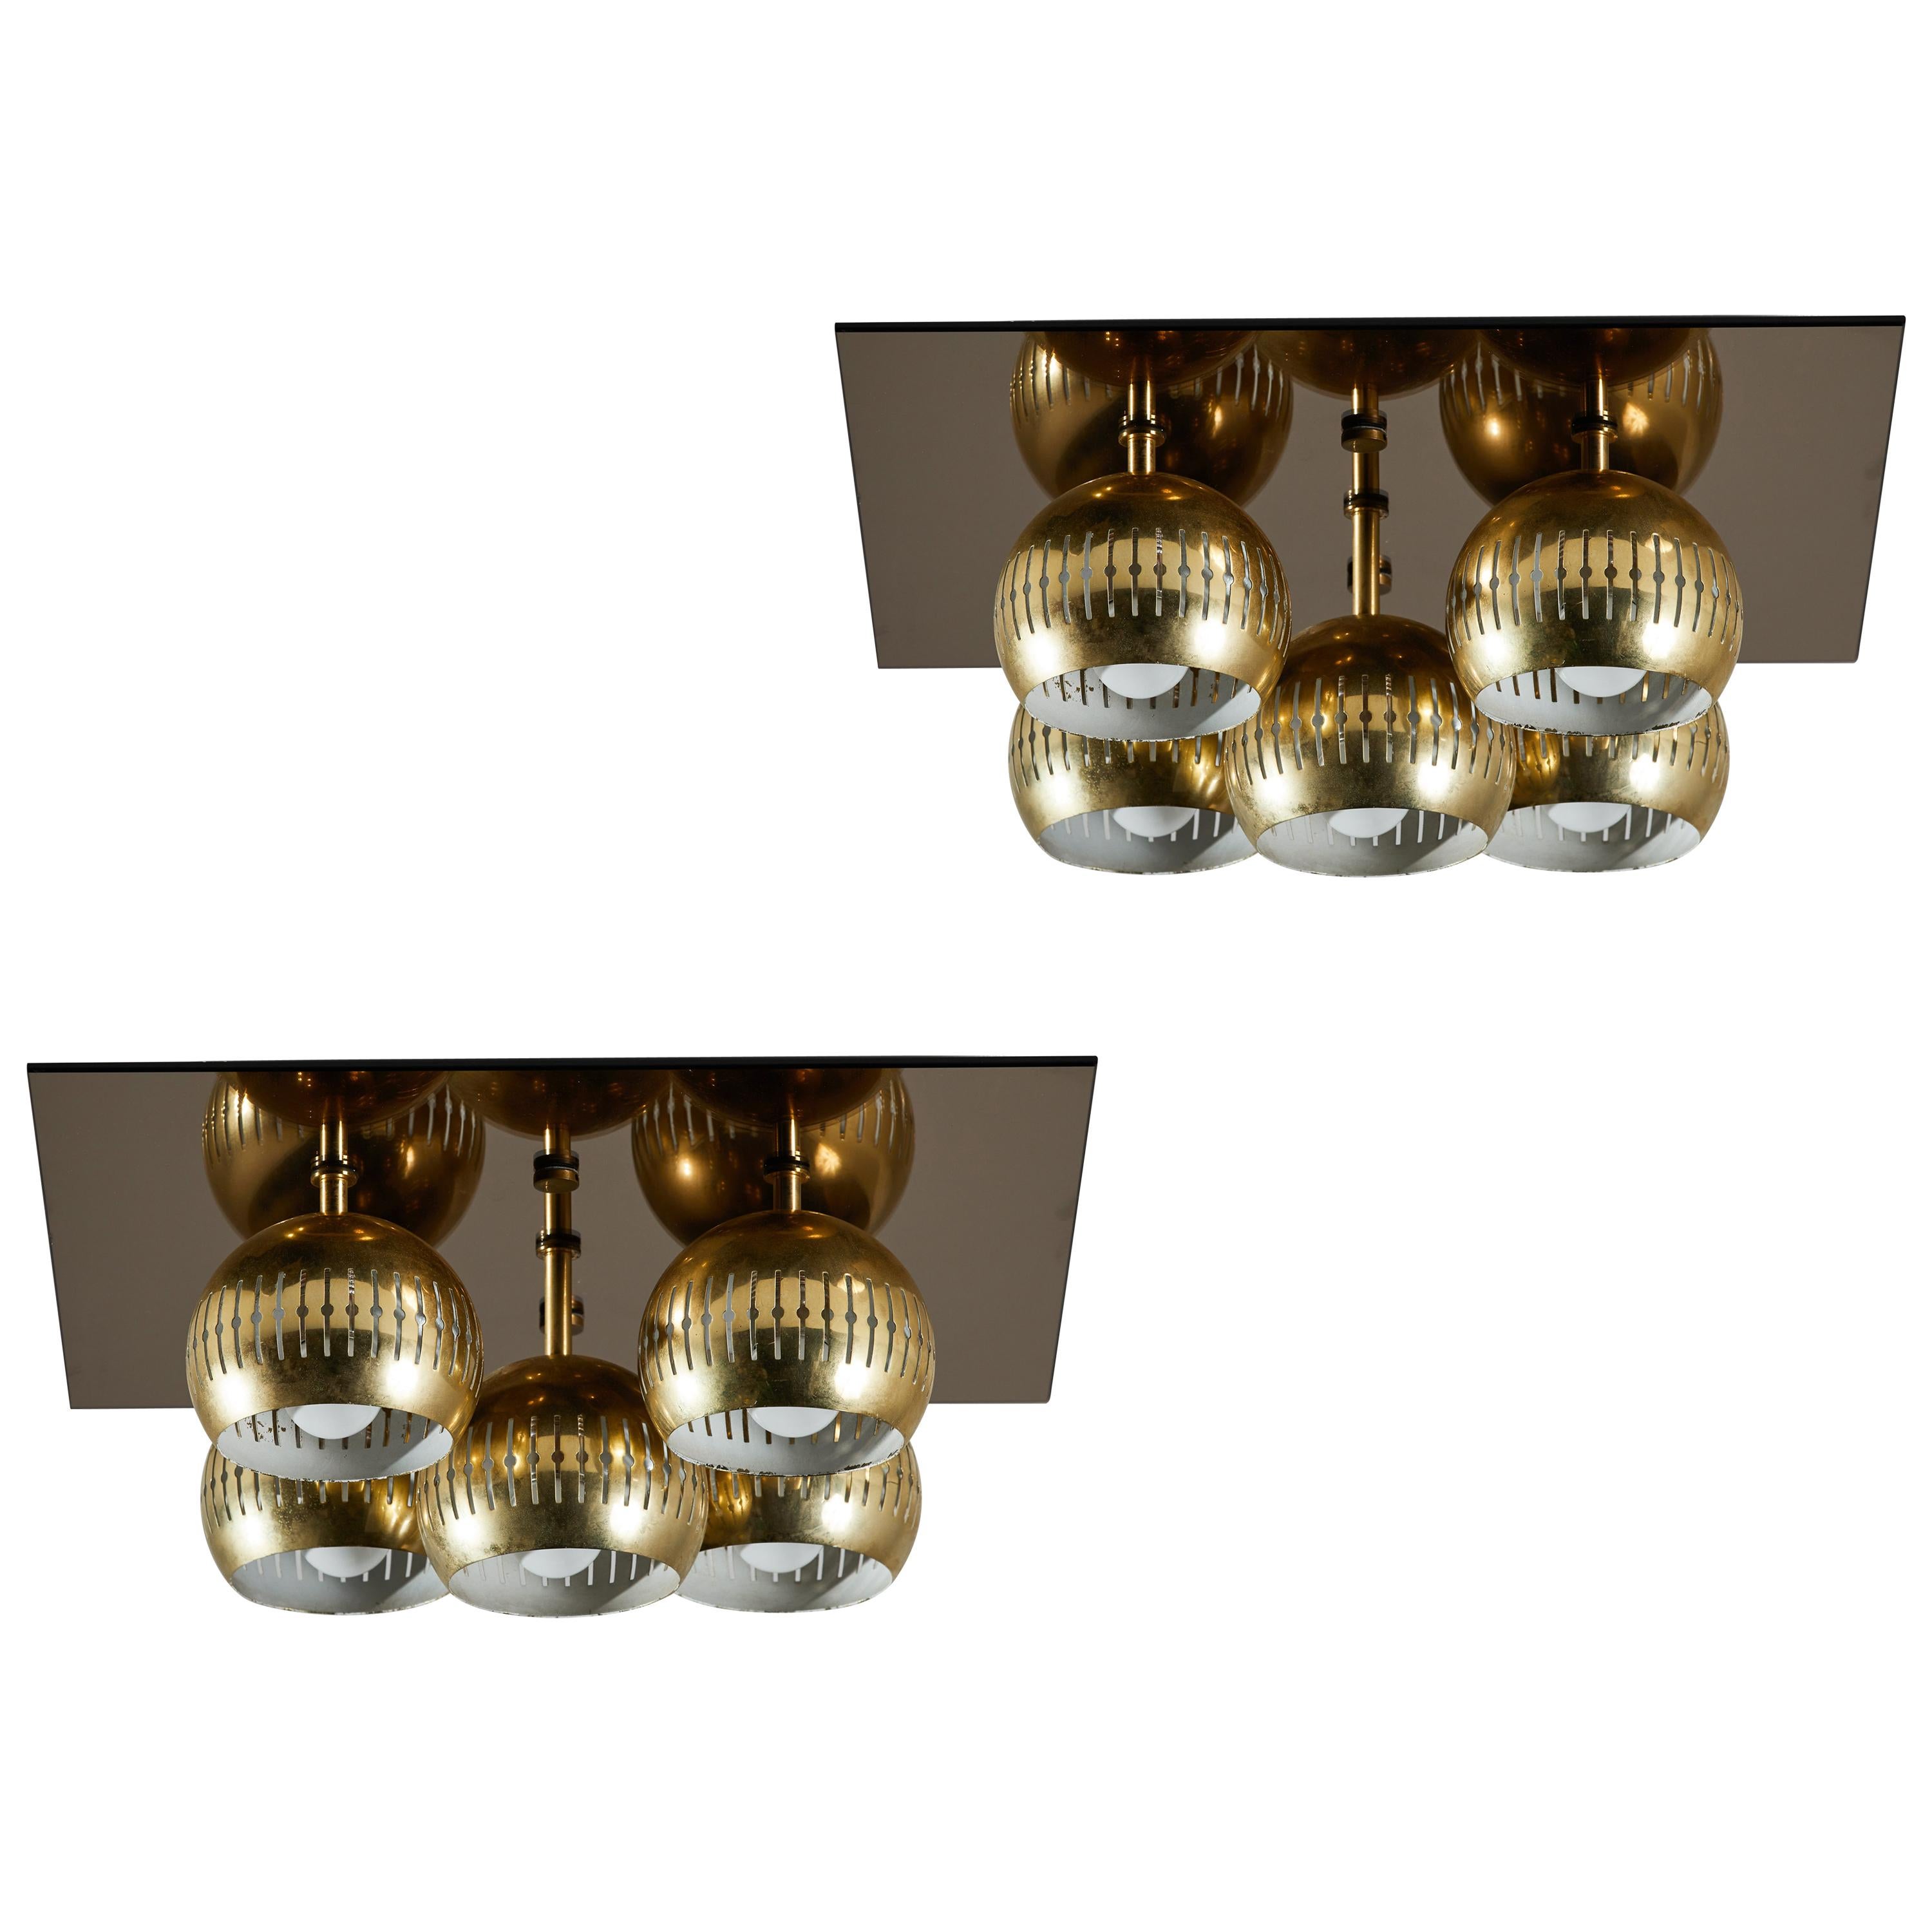 Two Model 14164 Wall or Ceiling Lights by Arredoluce